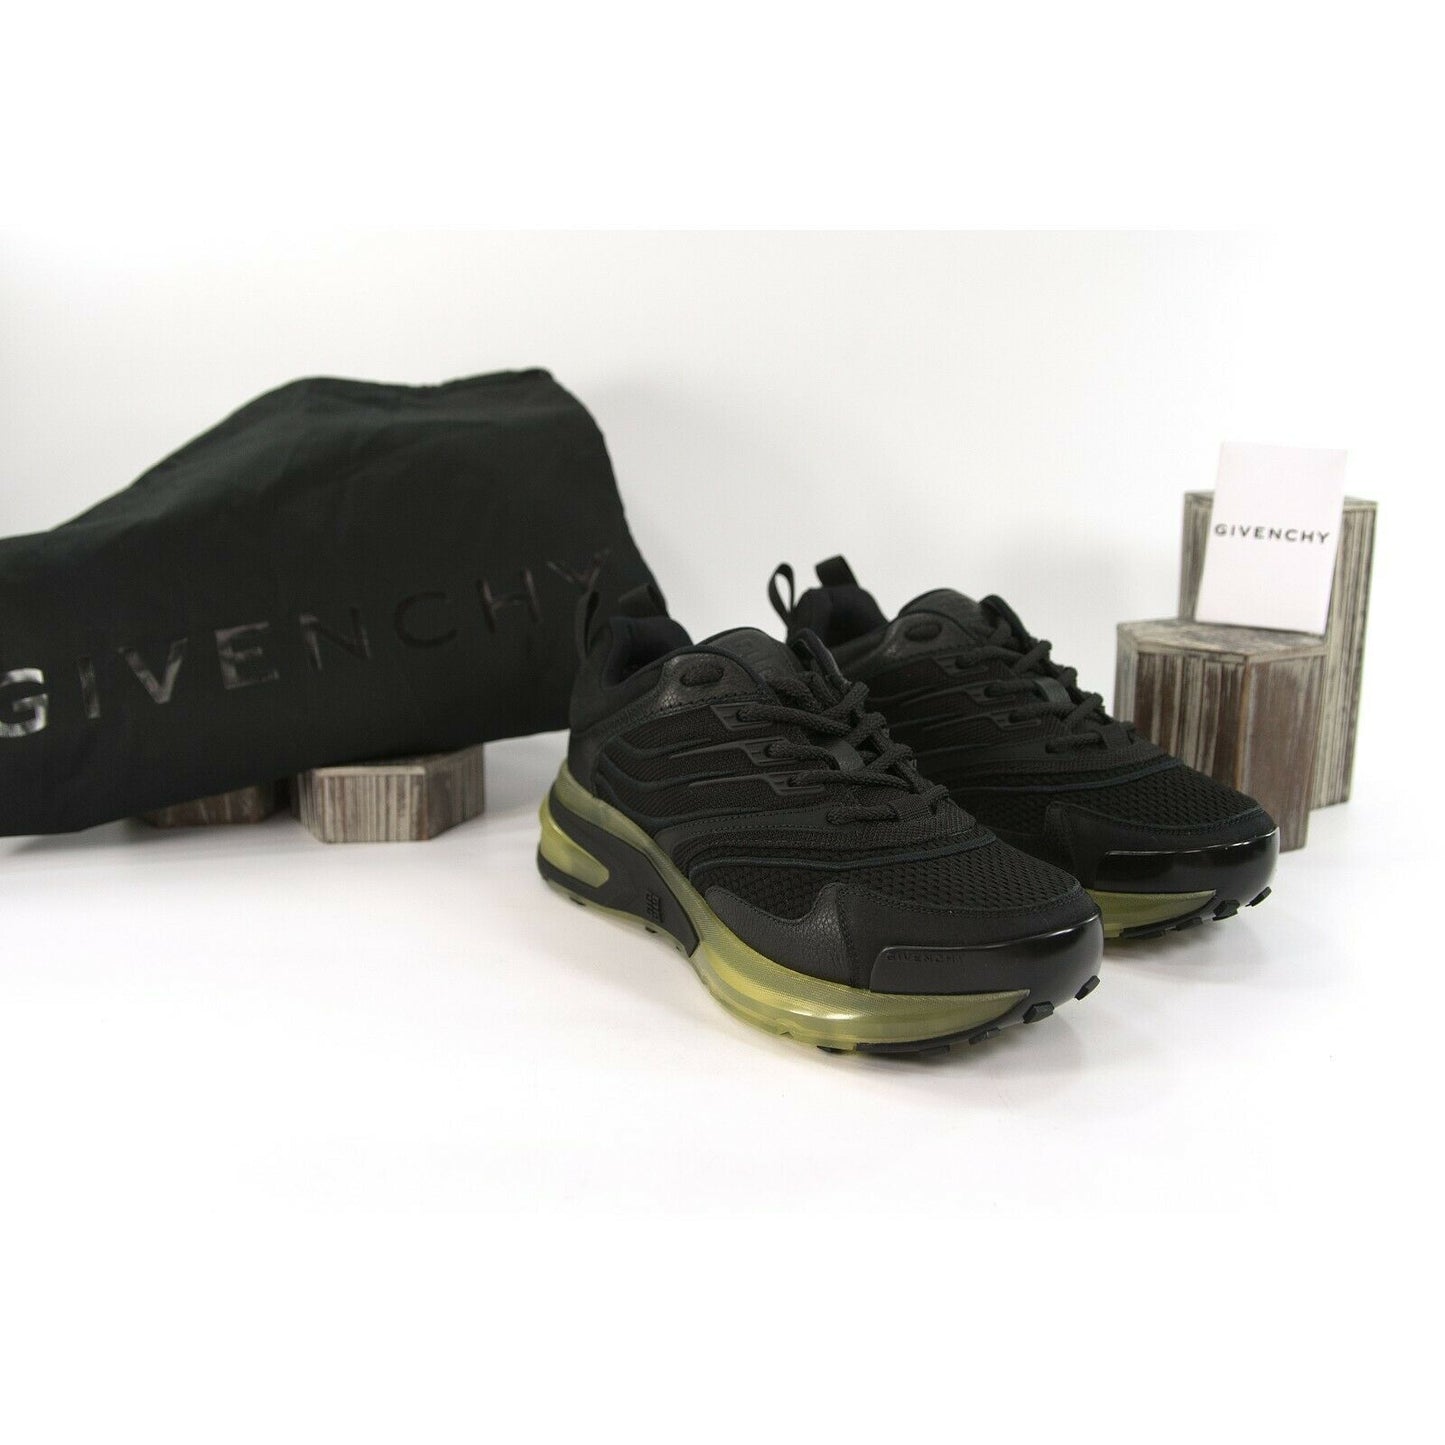 Givenchy GIV 1 Black Calf Leather Oversize Sneakers 38.5 NIB